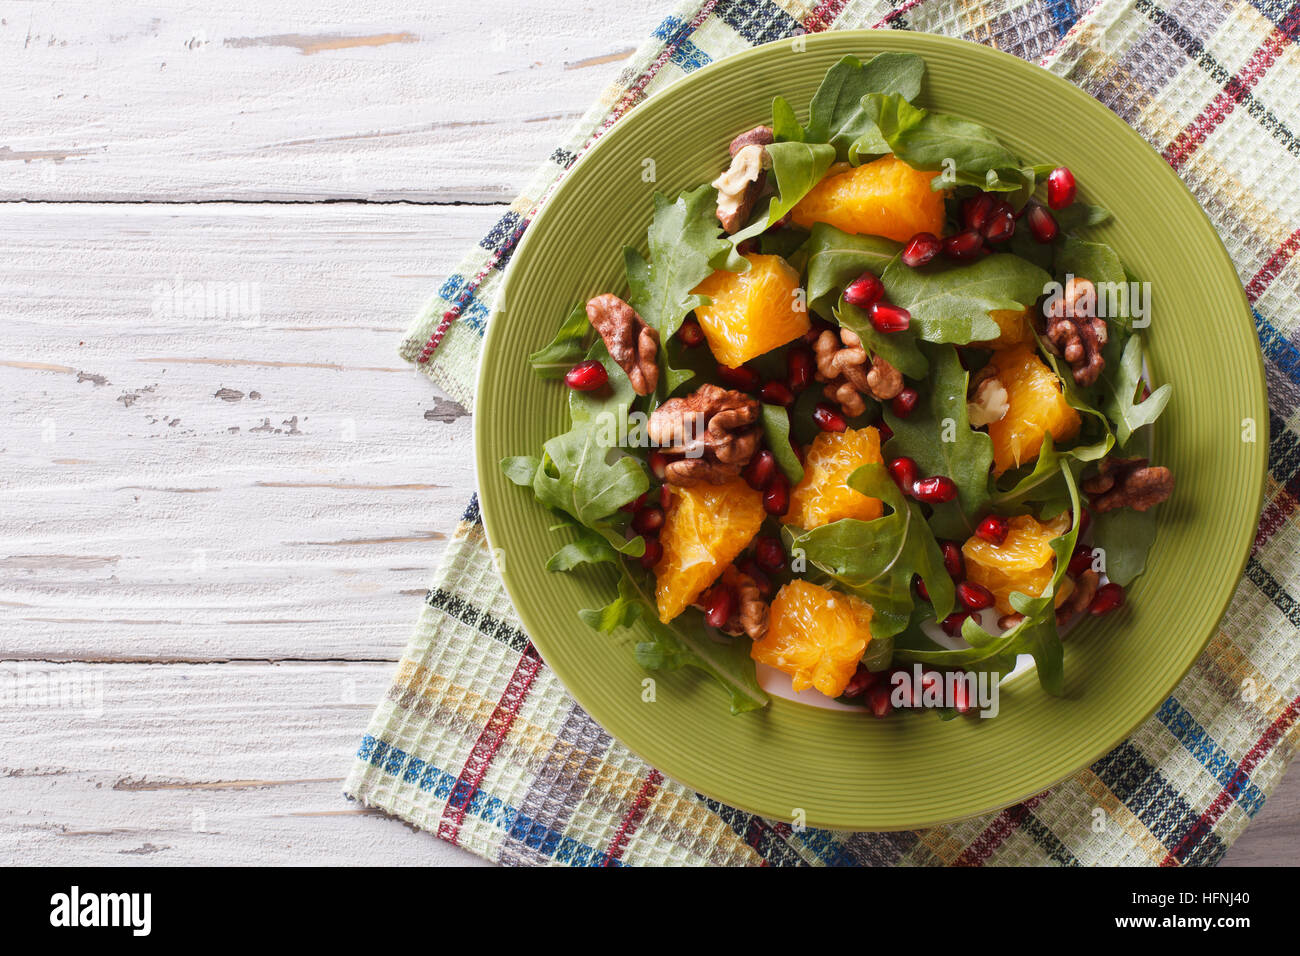 Delicious salad with pomegranate, oranges, walnuts and arugula on the table. horizontal top view Stock Photo